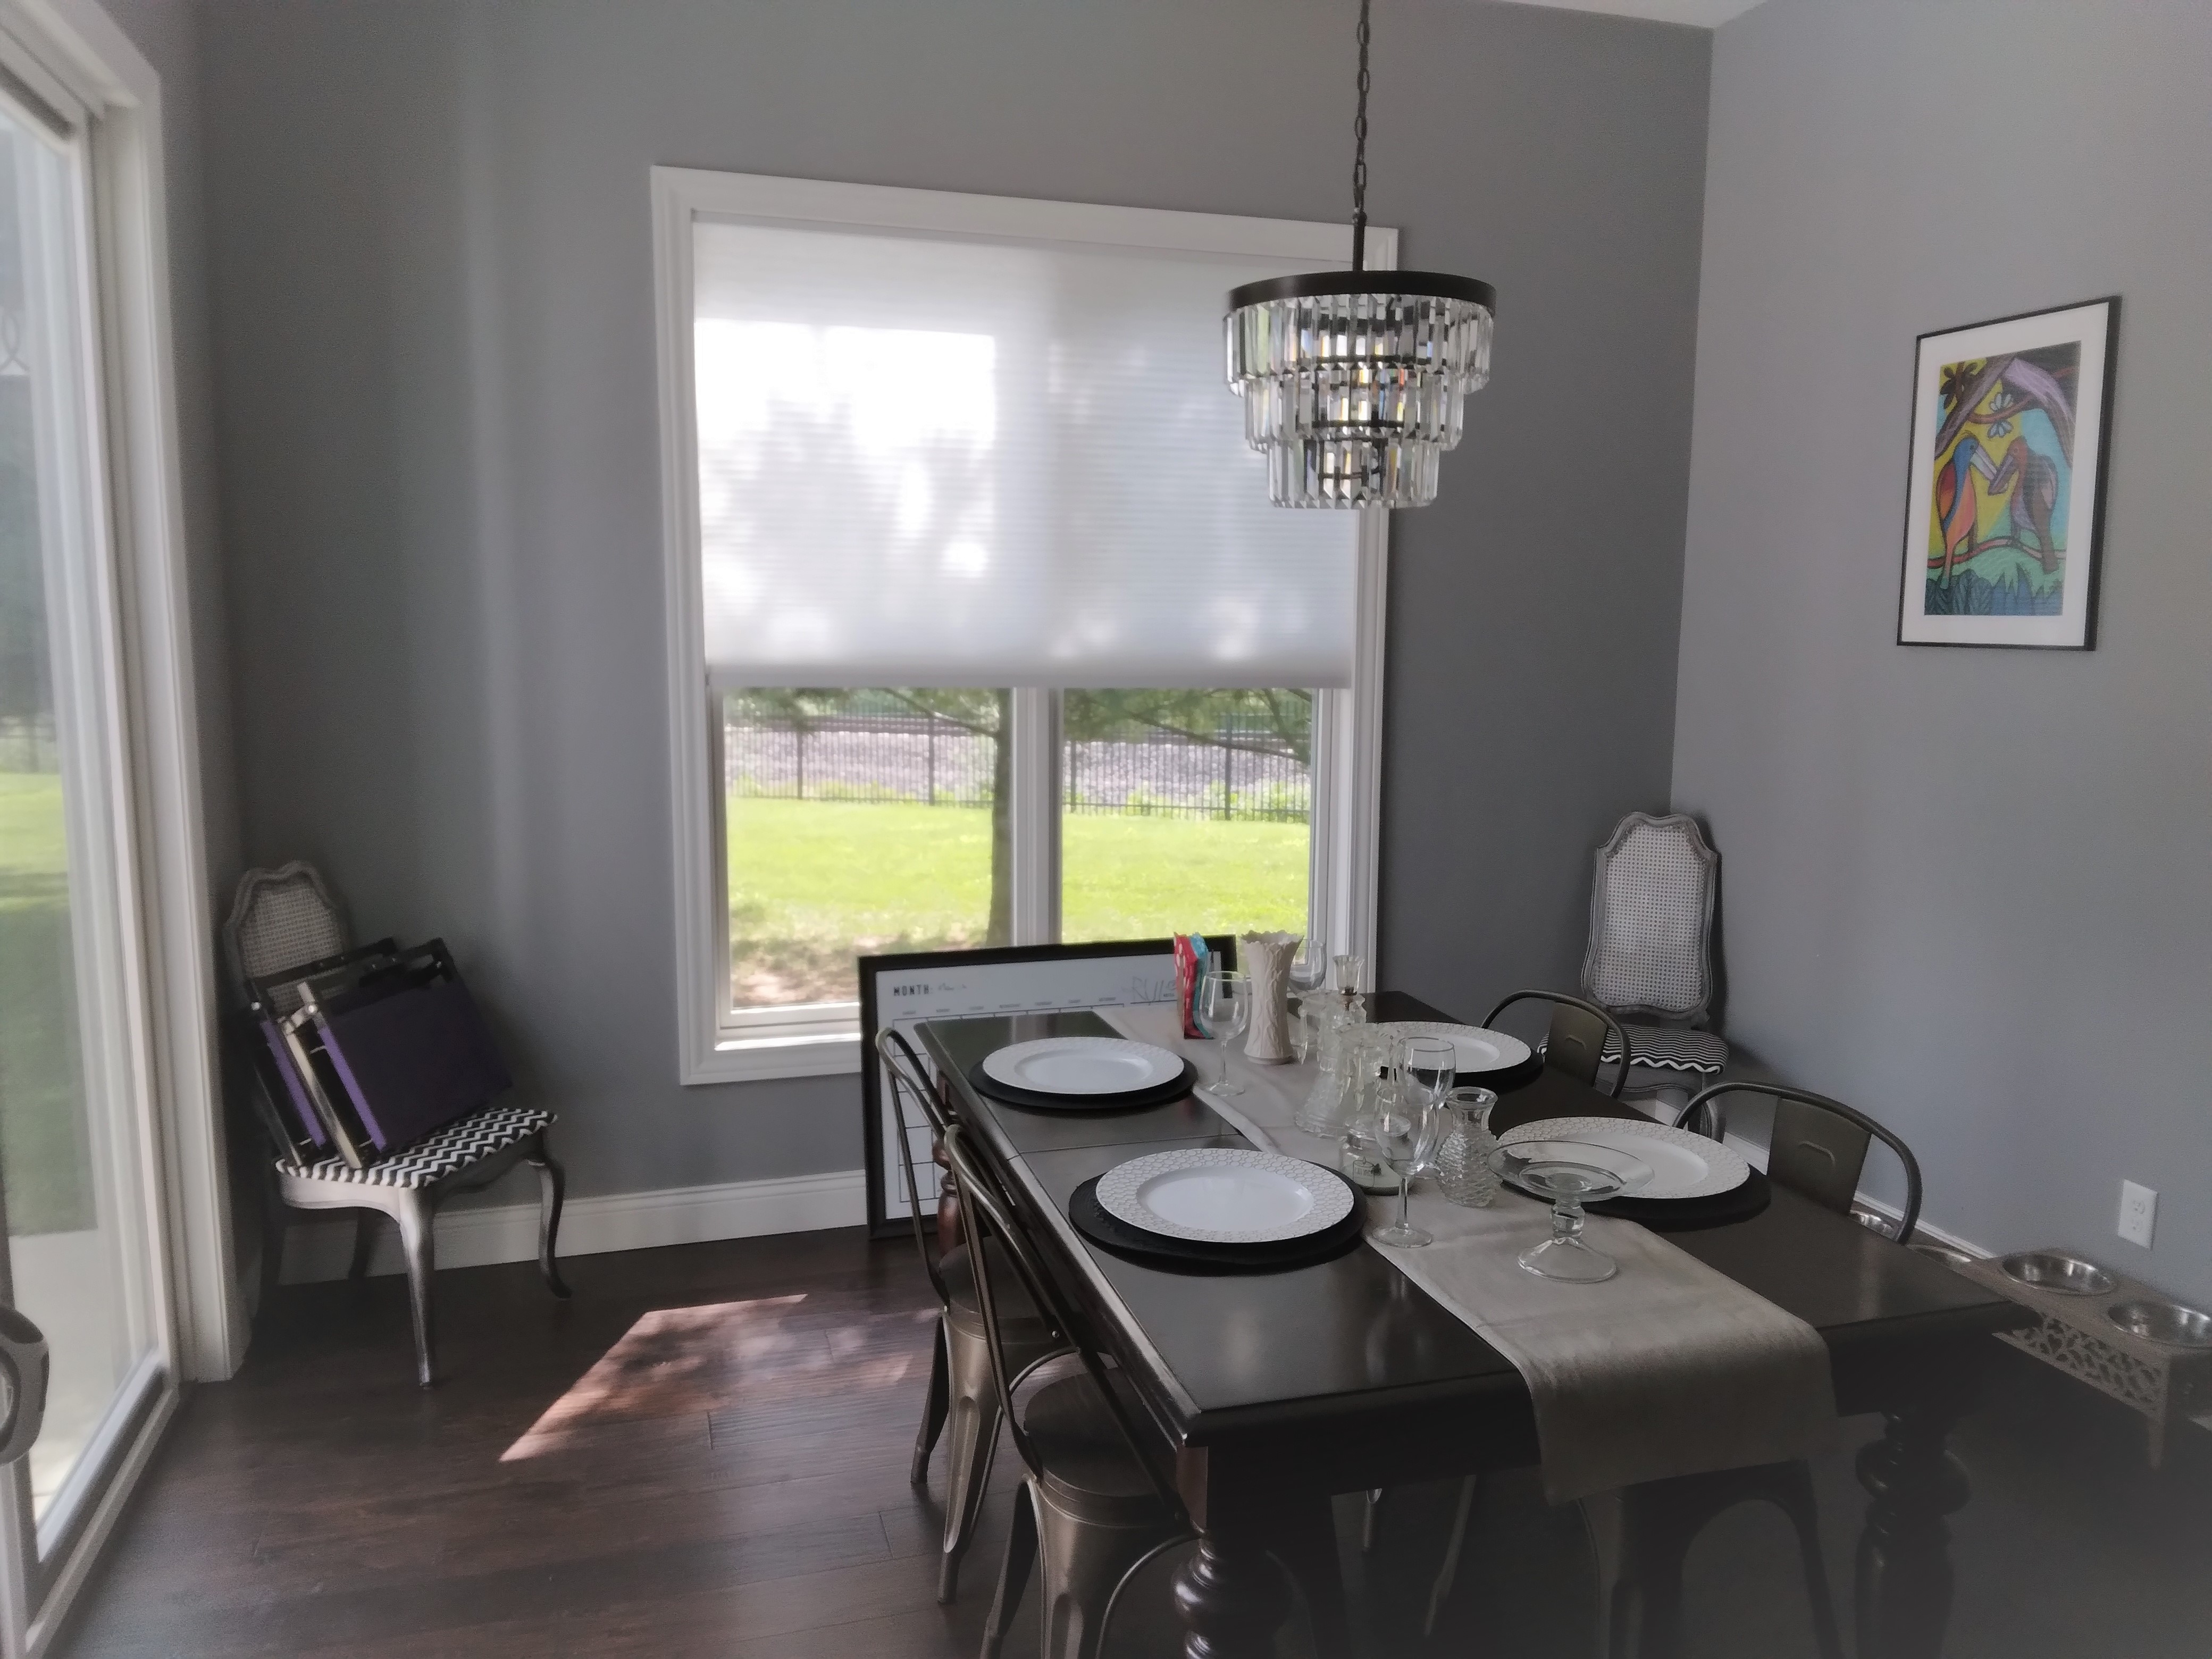 White cordless cellular shades in Springfield Illinois dining room.  BudgetBlinds  WindowCoverings  Shades  CellularShades  SpringfieldIllinois